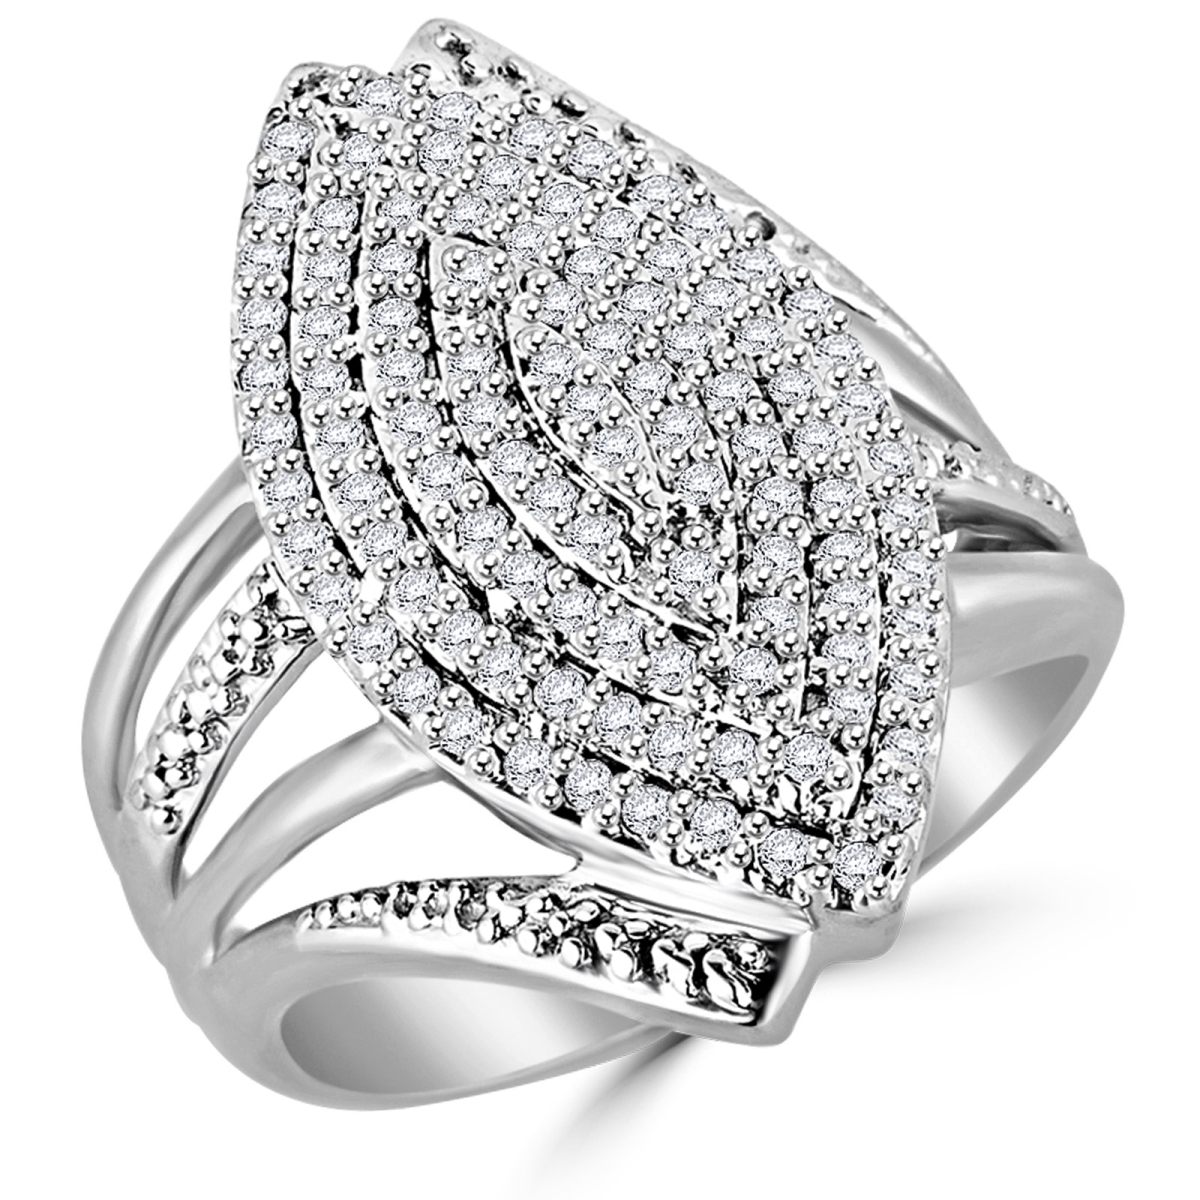 Picture of Majesty Diamonds MDR180001-3.25 0.5 CTW Round Diamond Marquise Cocktail Ring in 14K White Gold - Size 3.25